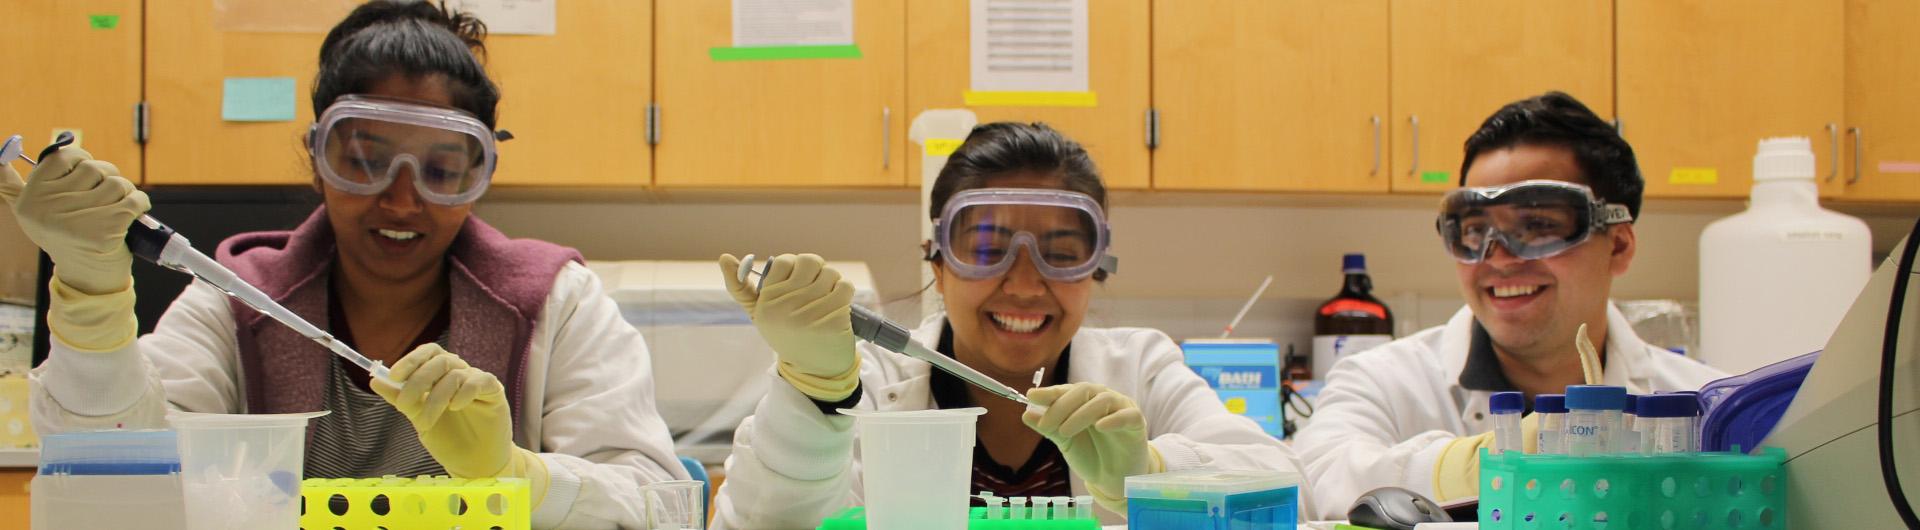 students pipetting in a research lab